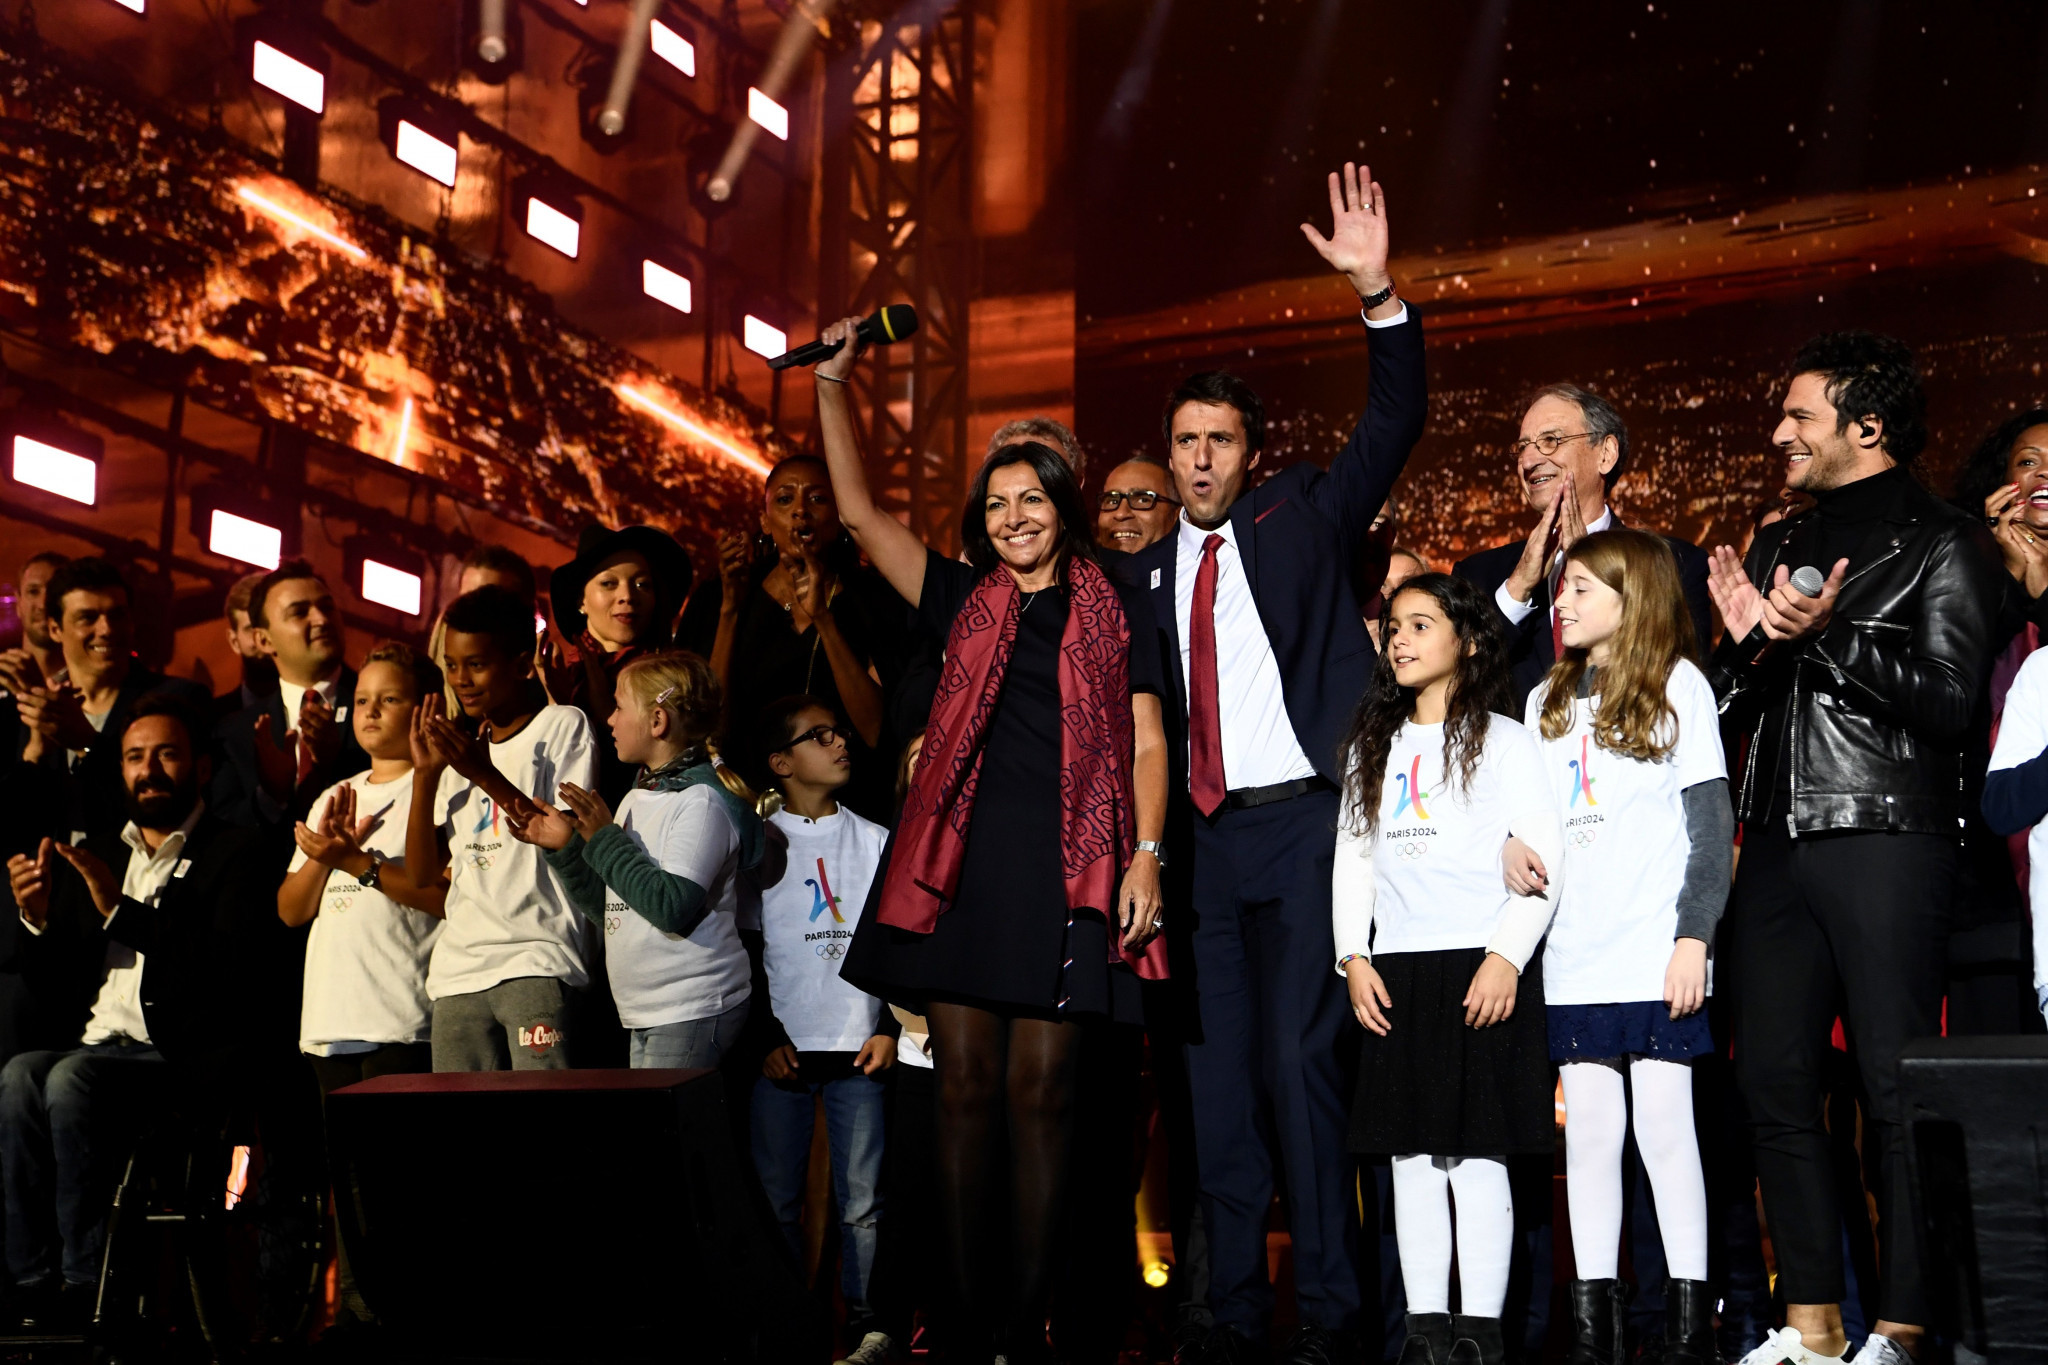 Paris 2024 have held a concert to mark being awarded the 2024 Olympic and Paralympic Games ©Getty Images